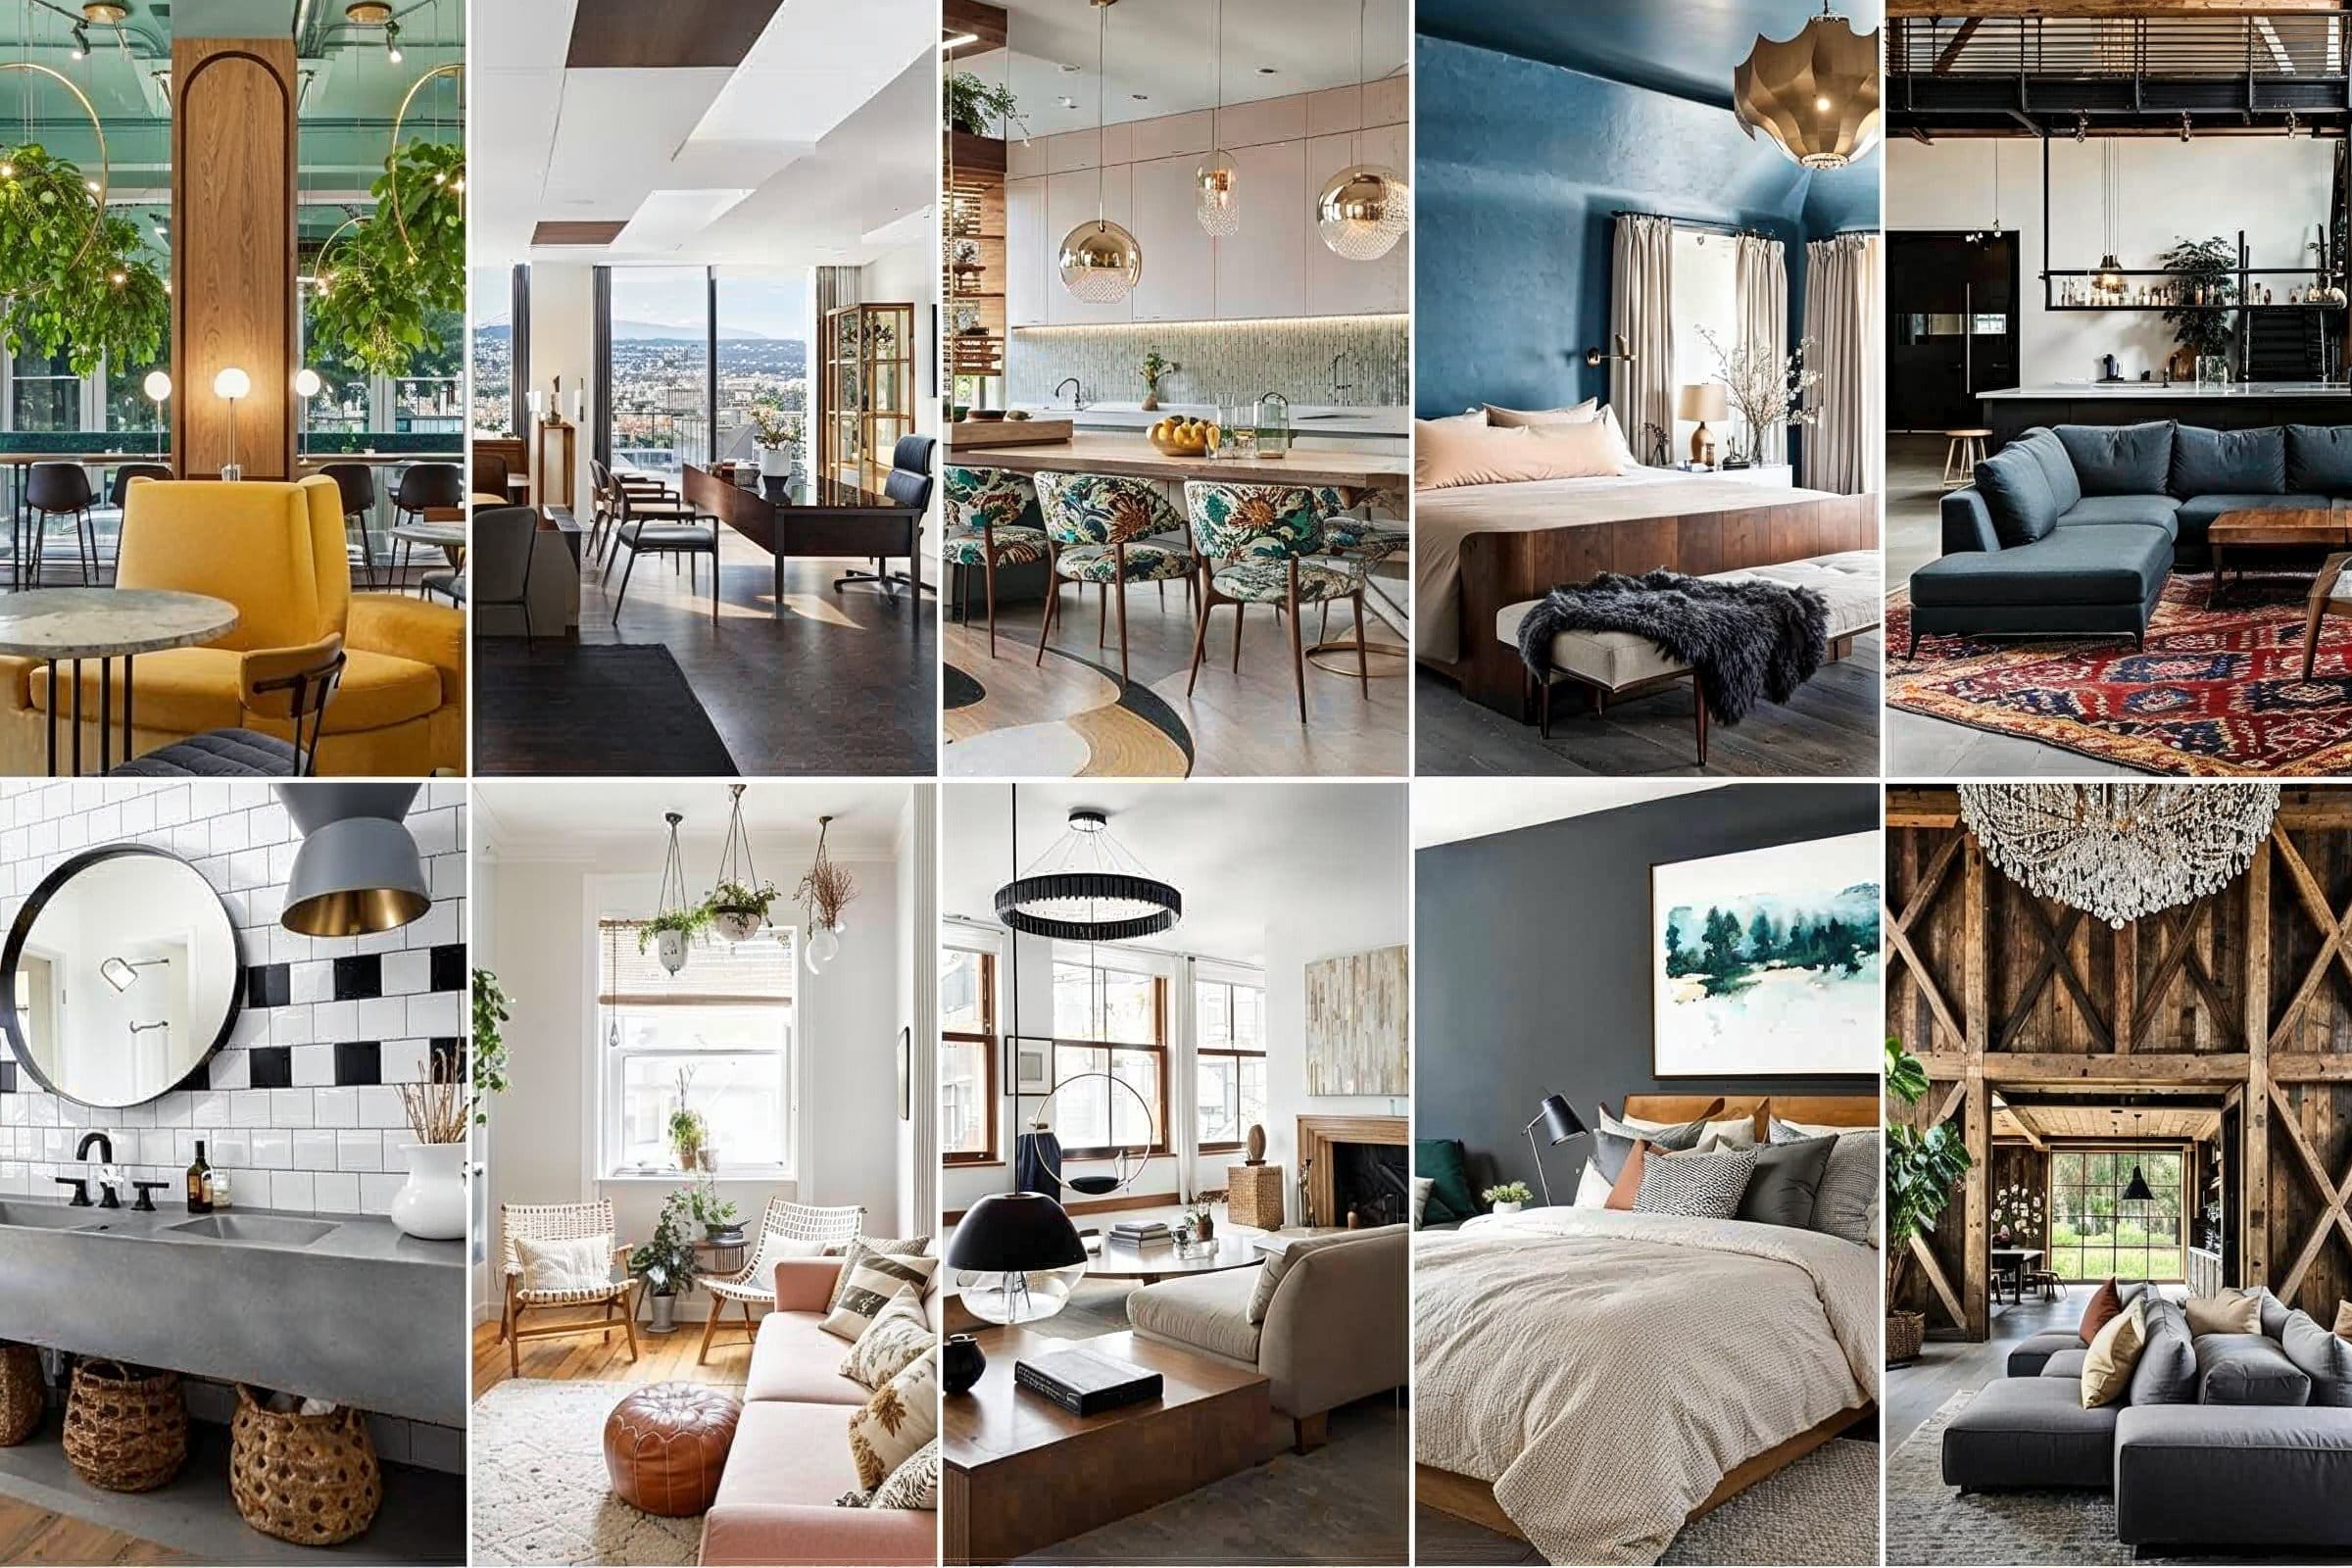 The 7 Best Home Décor Websites, According to Design Pros